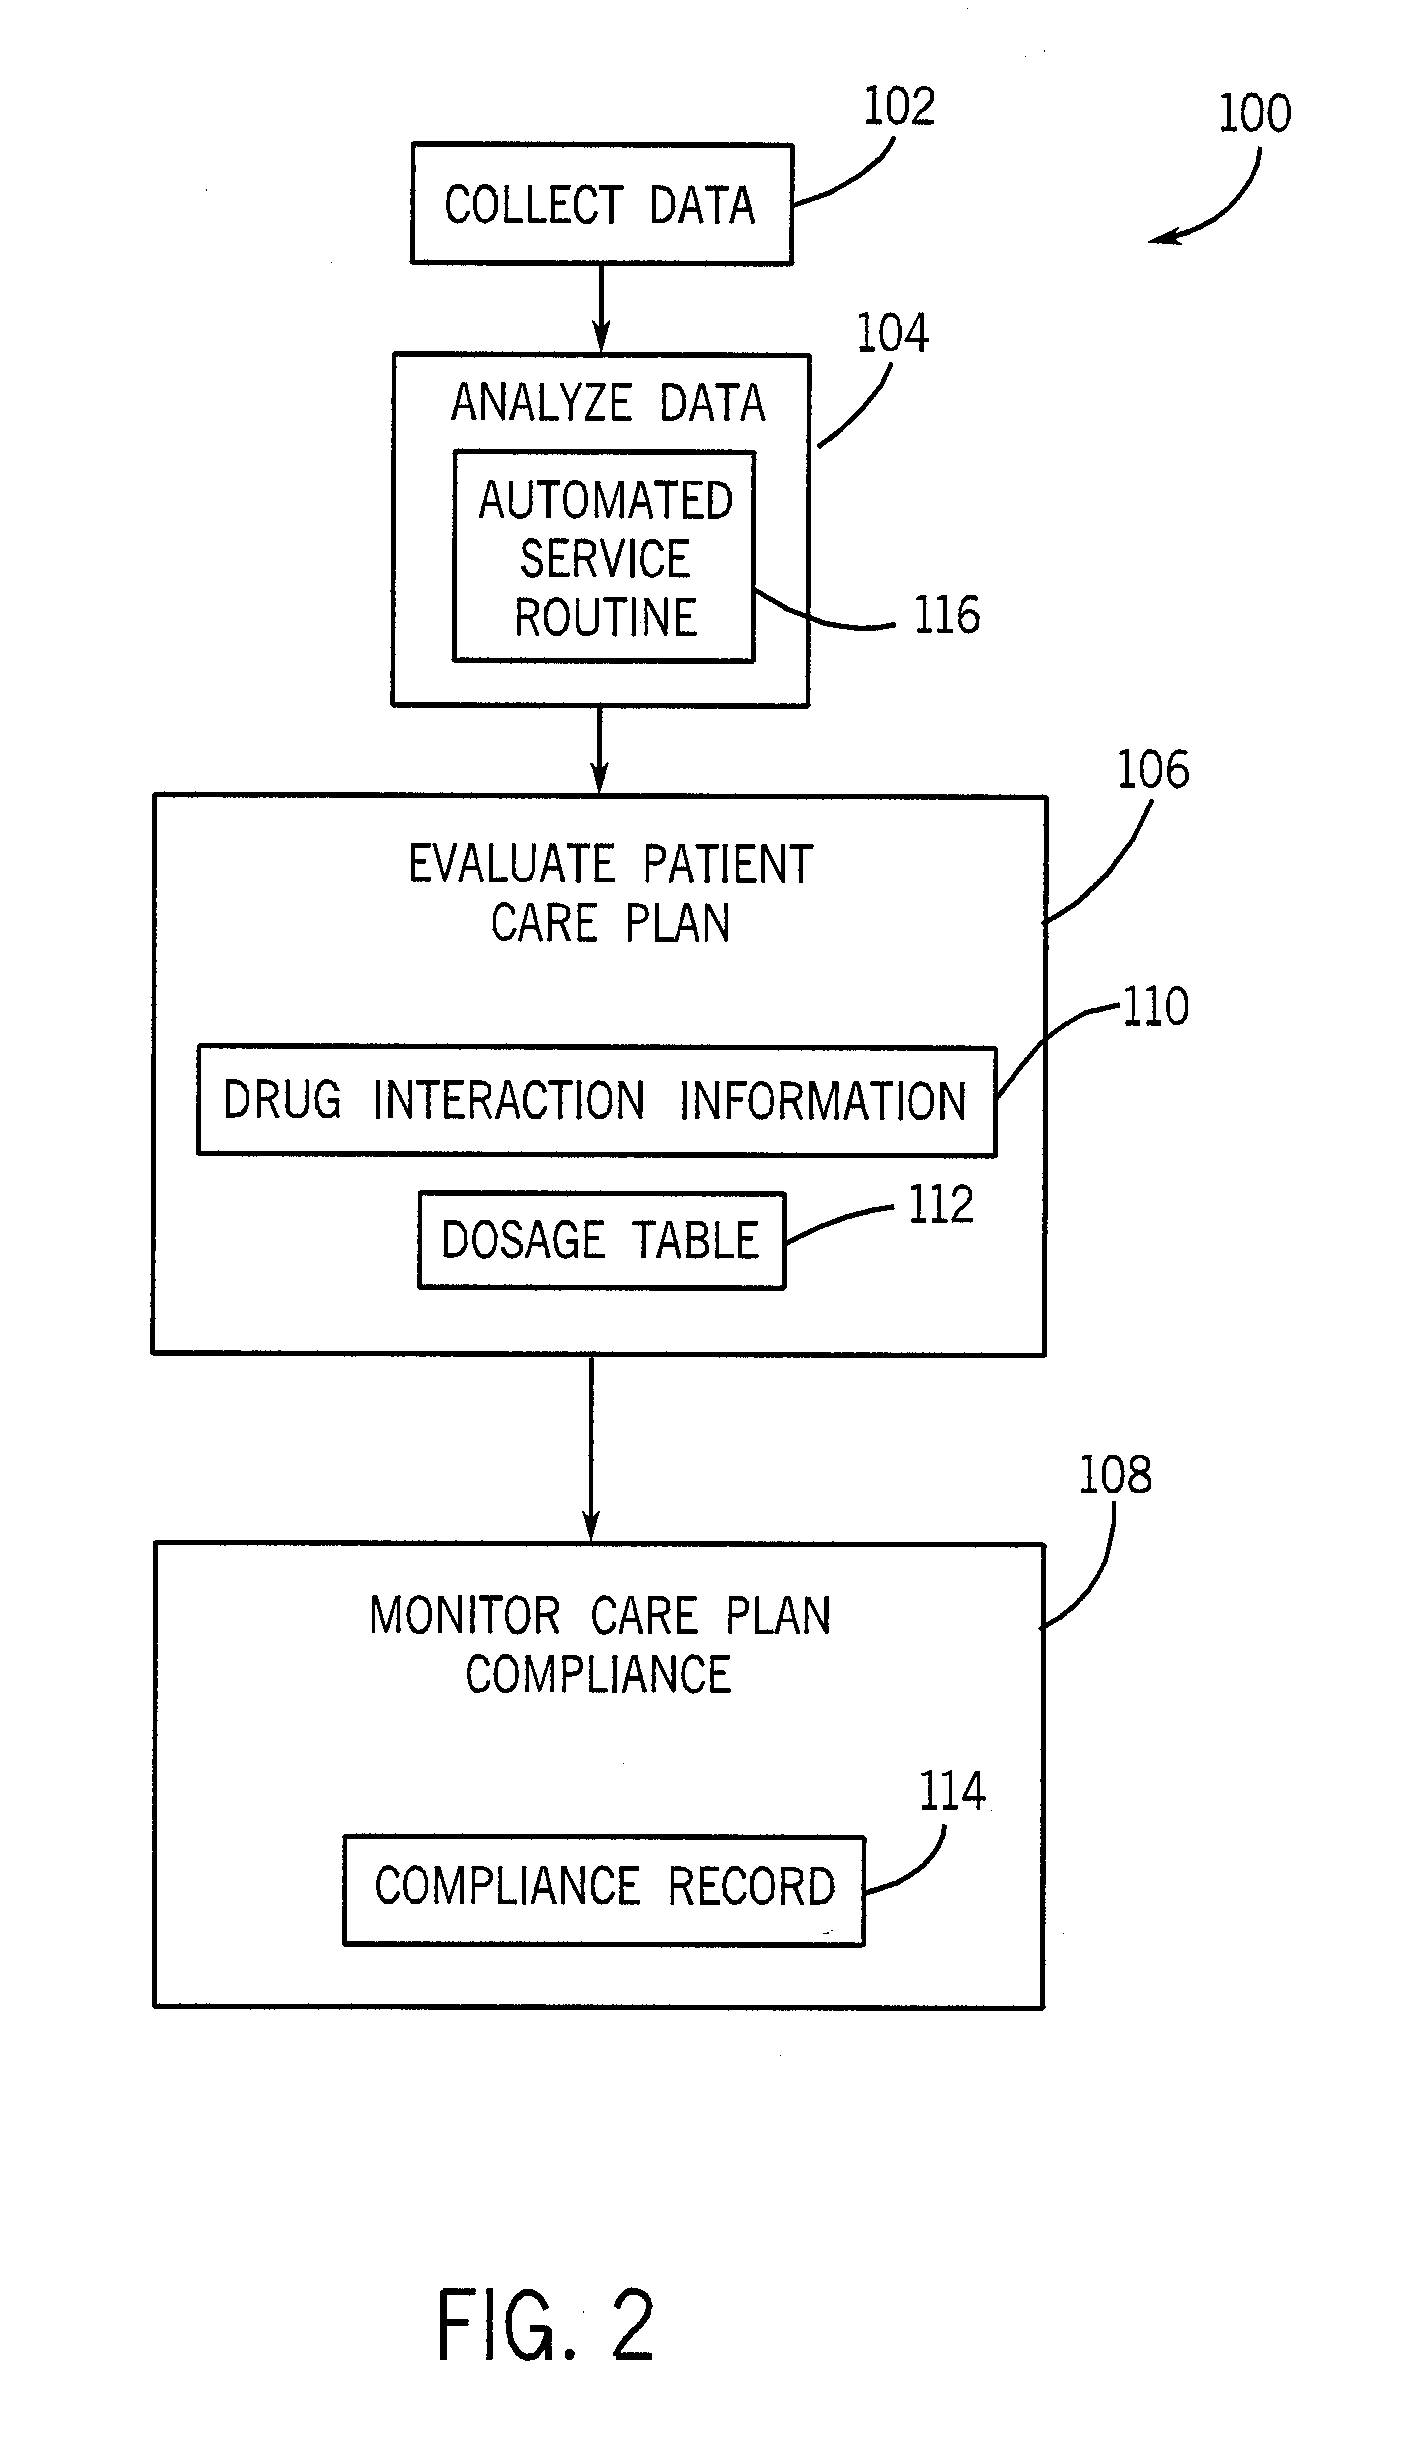 Smart bed system and apparatus